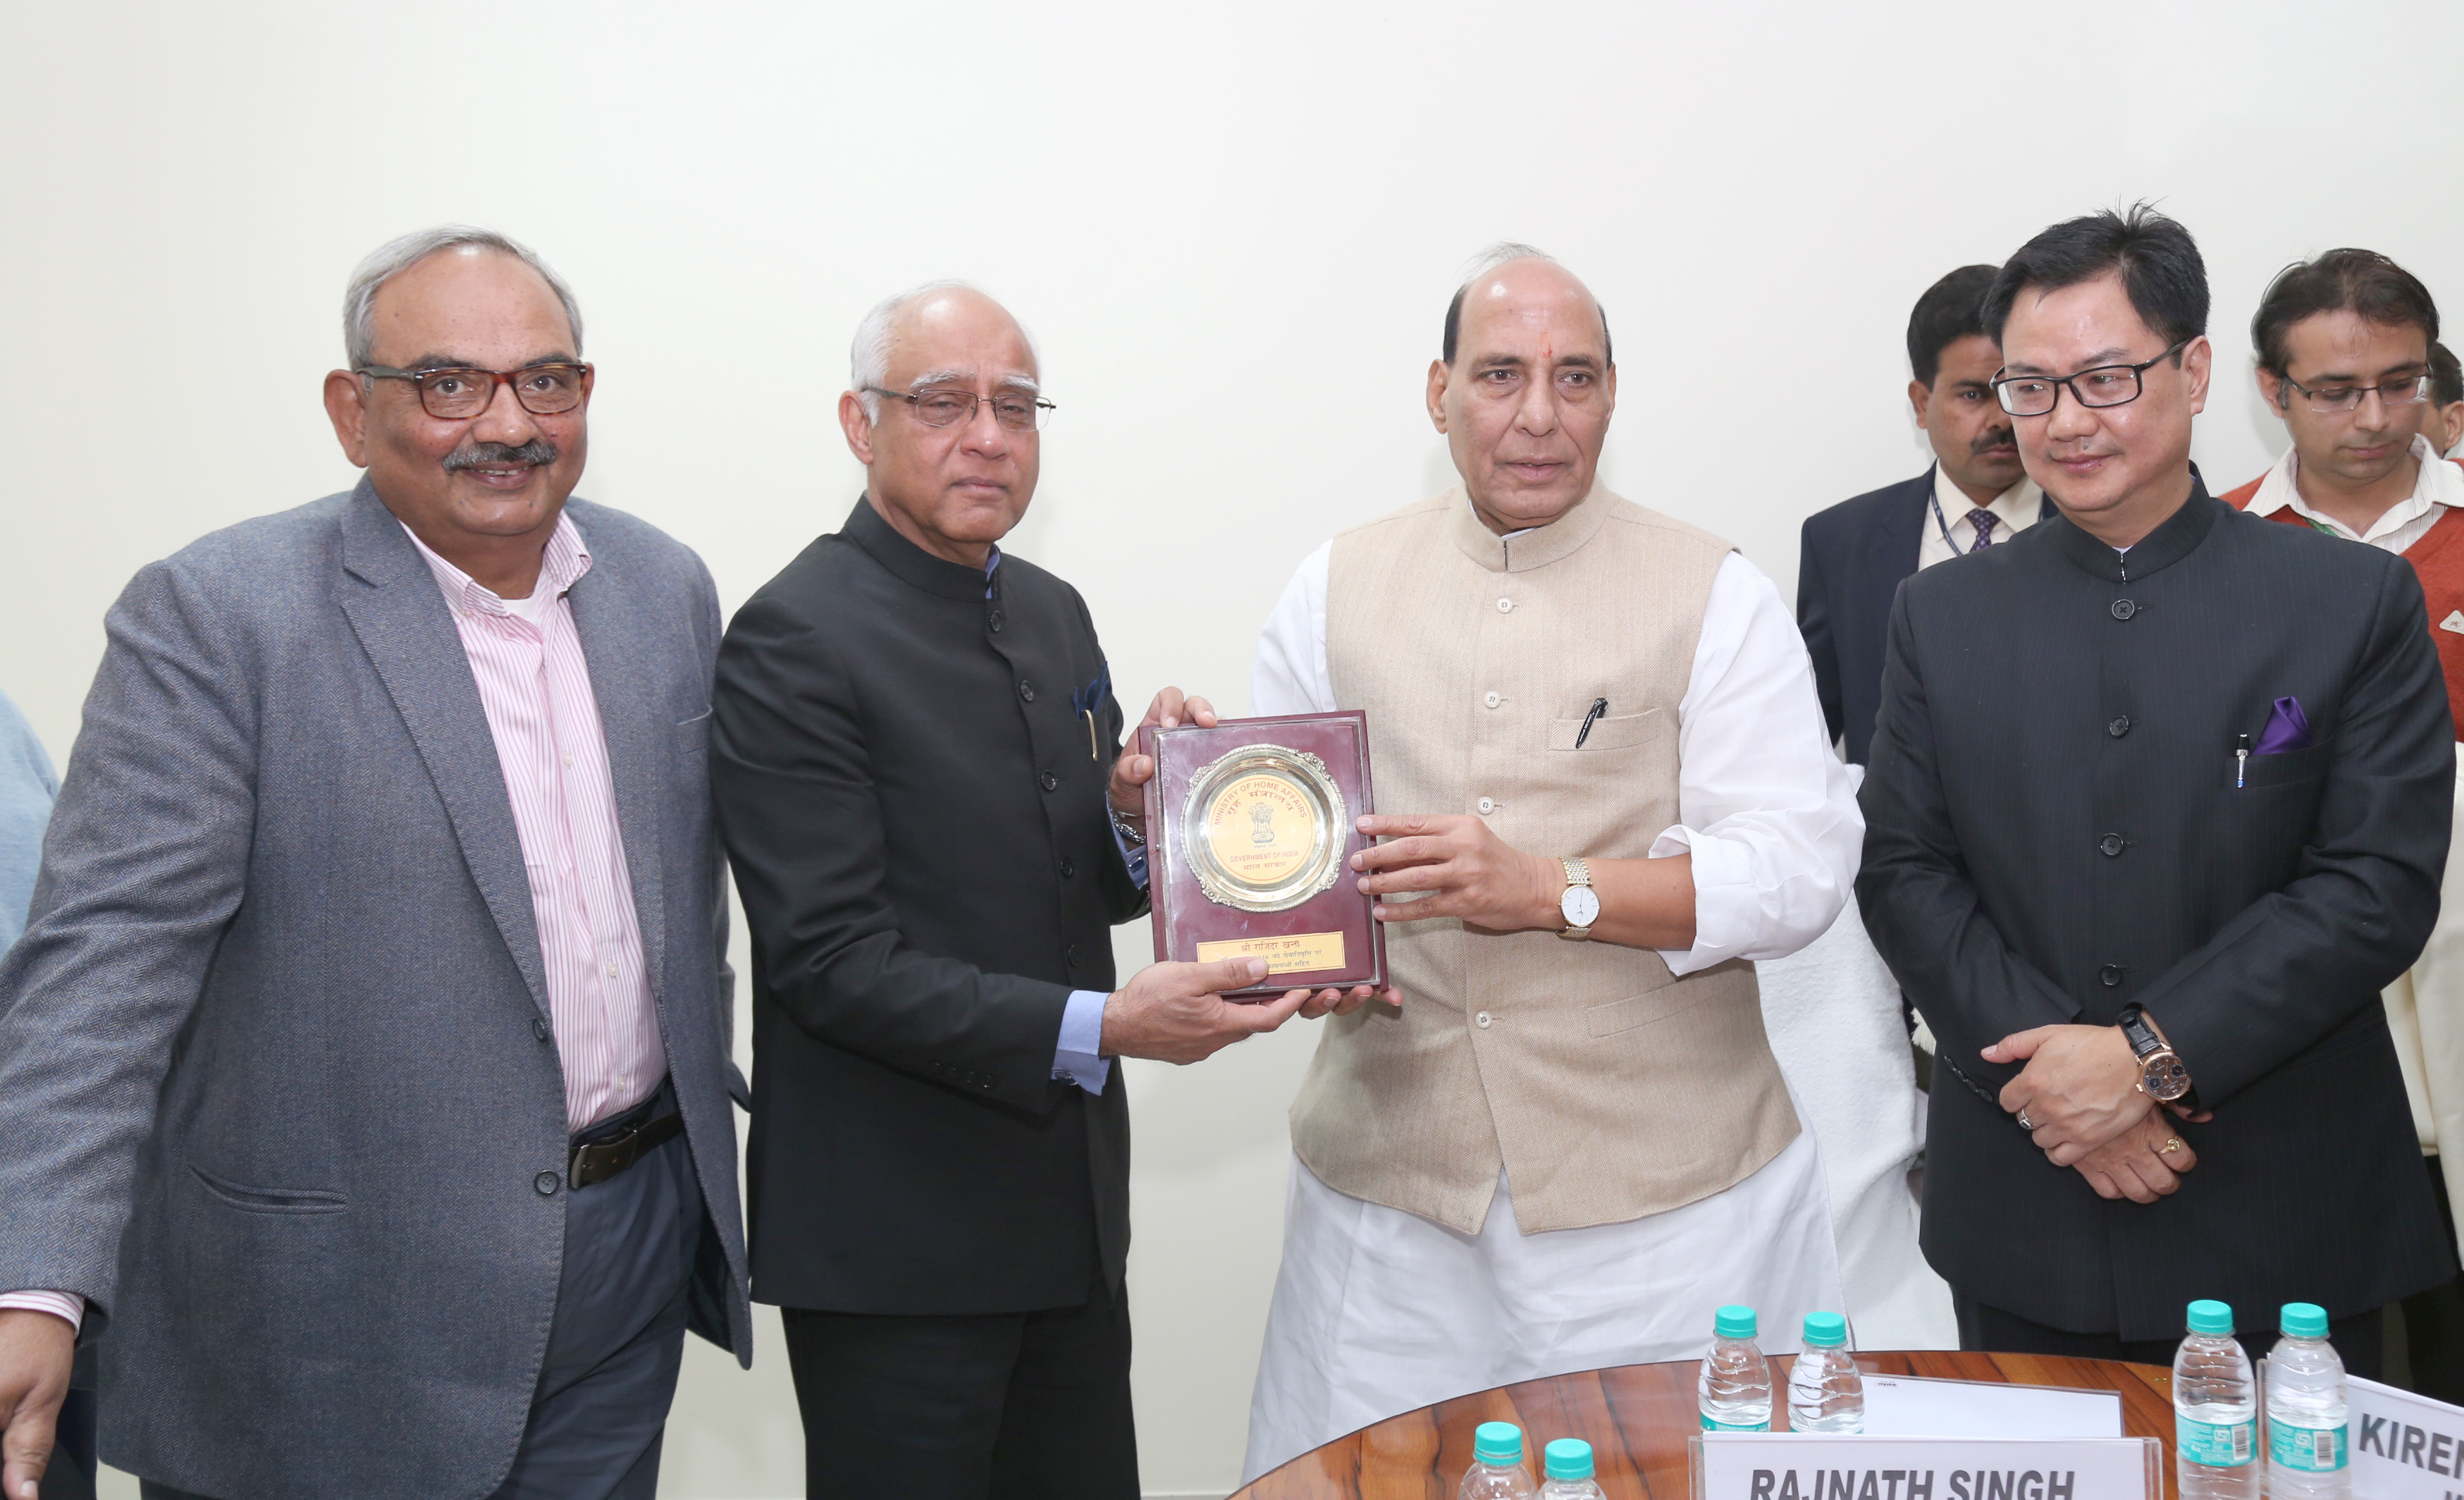 The Union Home Minister, Shri Rajnath Singh presenting a memento to Shri Rajinder Khanna, who retired as the Secretary (R) on December 31, 2016, at a function, in New Delhi on January 01, 2017. 	 The Minister of State for Home Affairs, Shri Kiren Rijiju and the Union Home Secretary, Shri Rajiv Mehrishi are also seen.